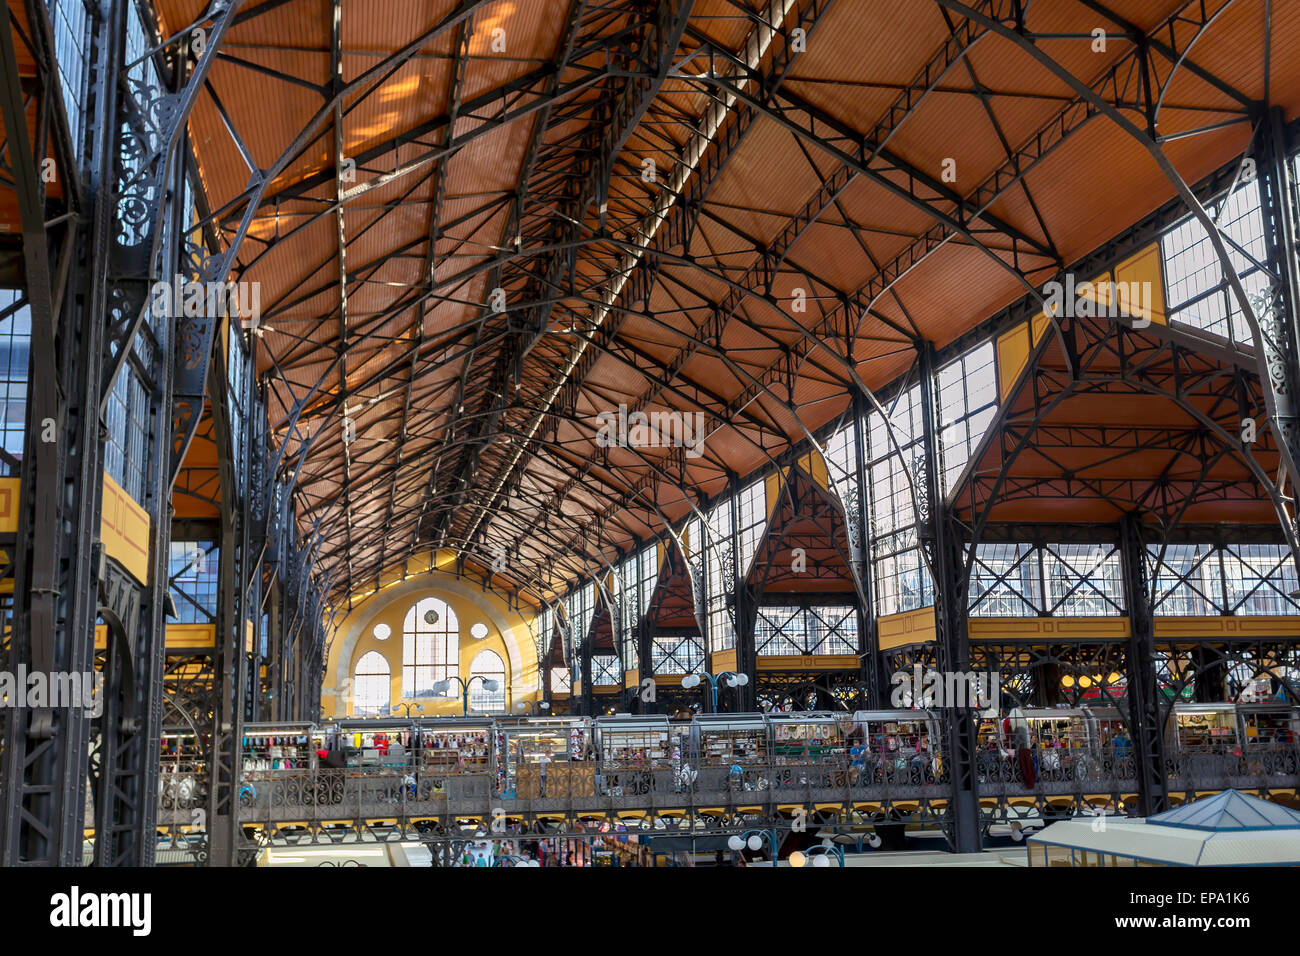 Interior view of the Central Market Hall in Budapest, Hungary Stock Photo